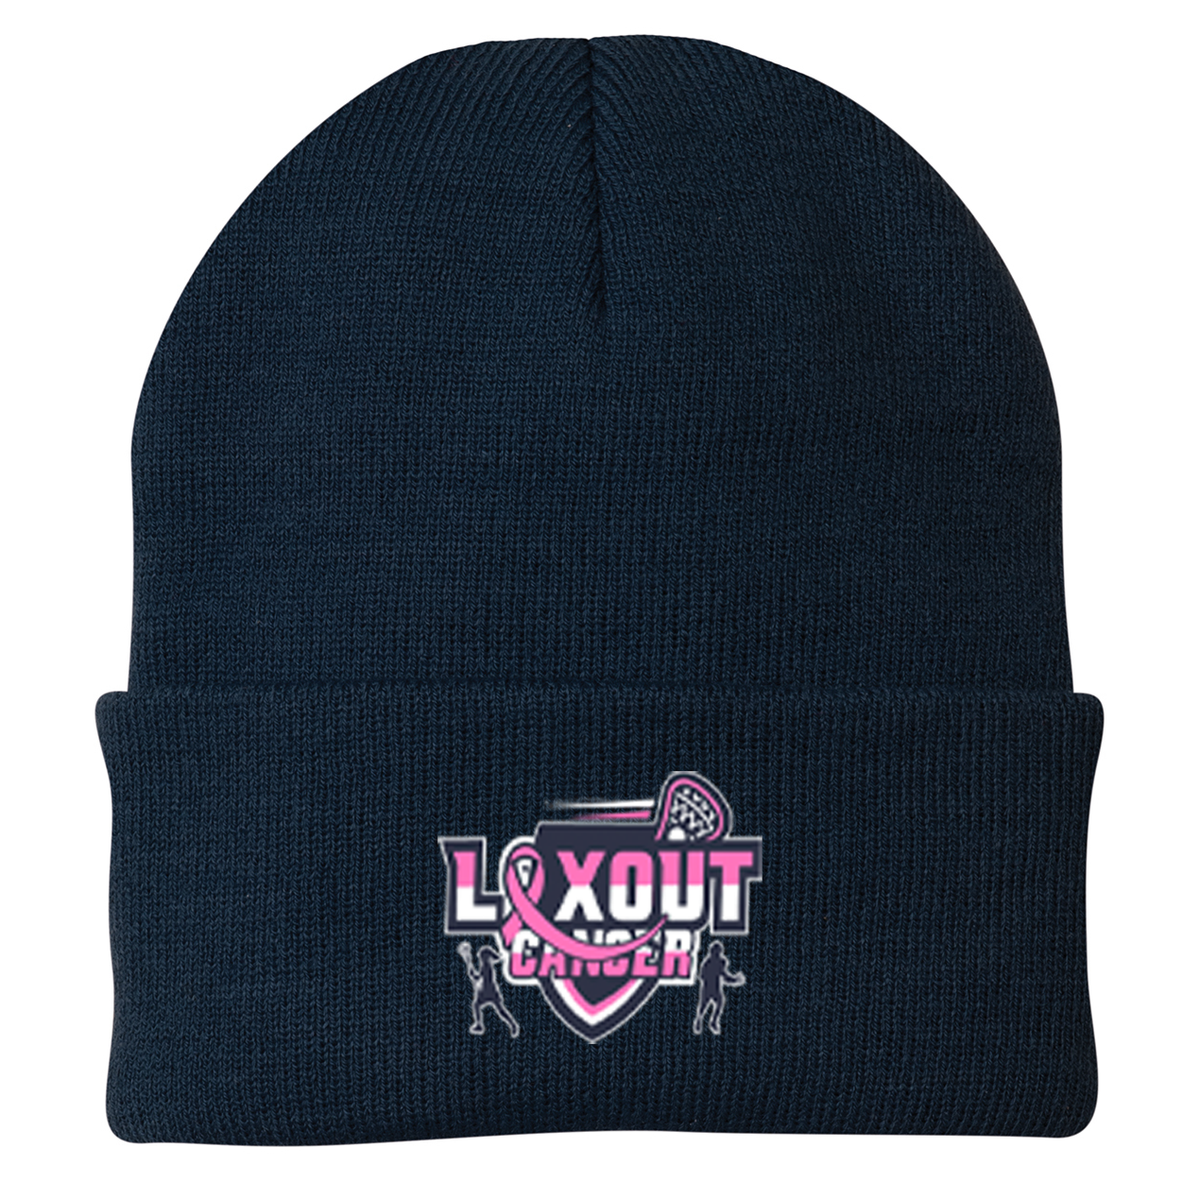 LaxOut Cancer Knit Beanie